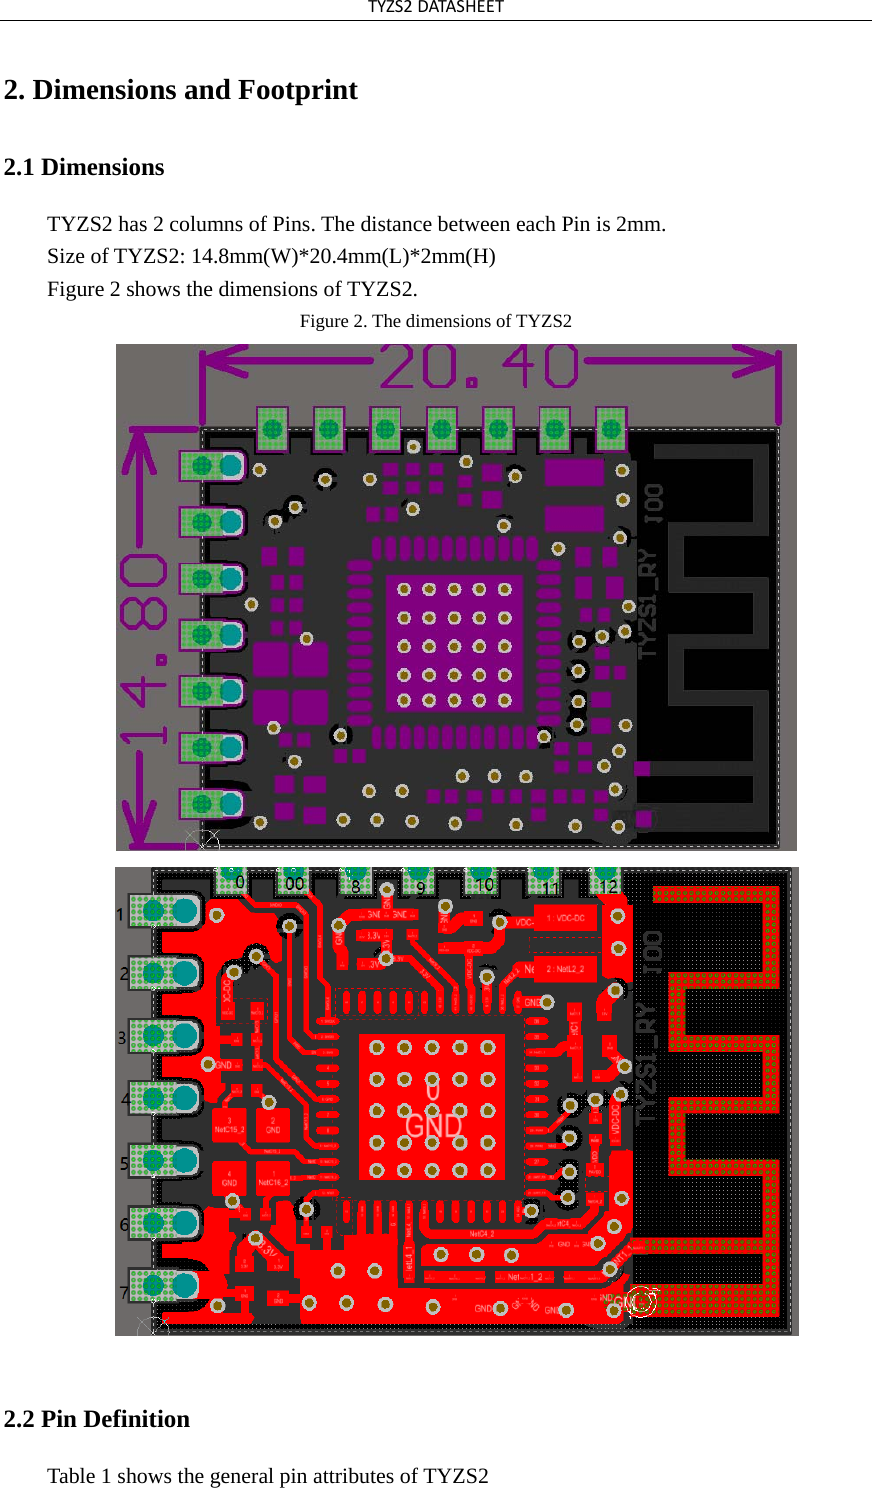 TYZS2DATASHEET2. Dimensions and Footprint2.1 Dimensions TYZS2 has 2 columns of Pins. The distance between each Pin is 2mm. Size of TYZS2: 14.8mm(W)*20.4mm(L)*2mm(H) Figure 2 shows the dimensions of TYZS2. Figure 2. The dimensions of TYZS2 2.2 Pin Definition Table 1 shows the general pin attributes of TYZS2 